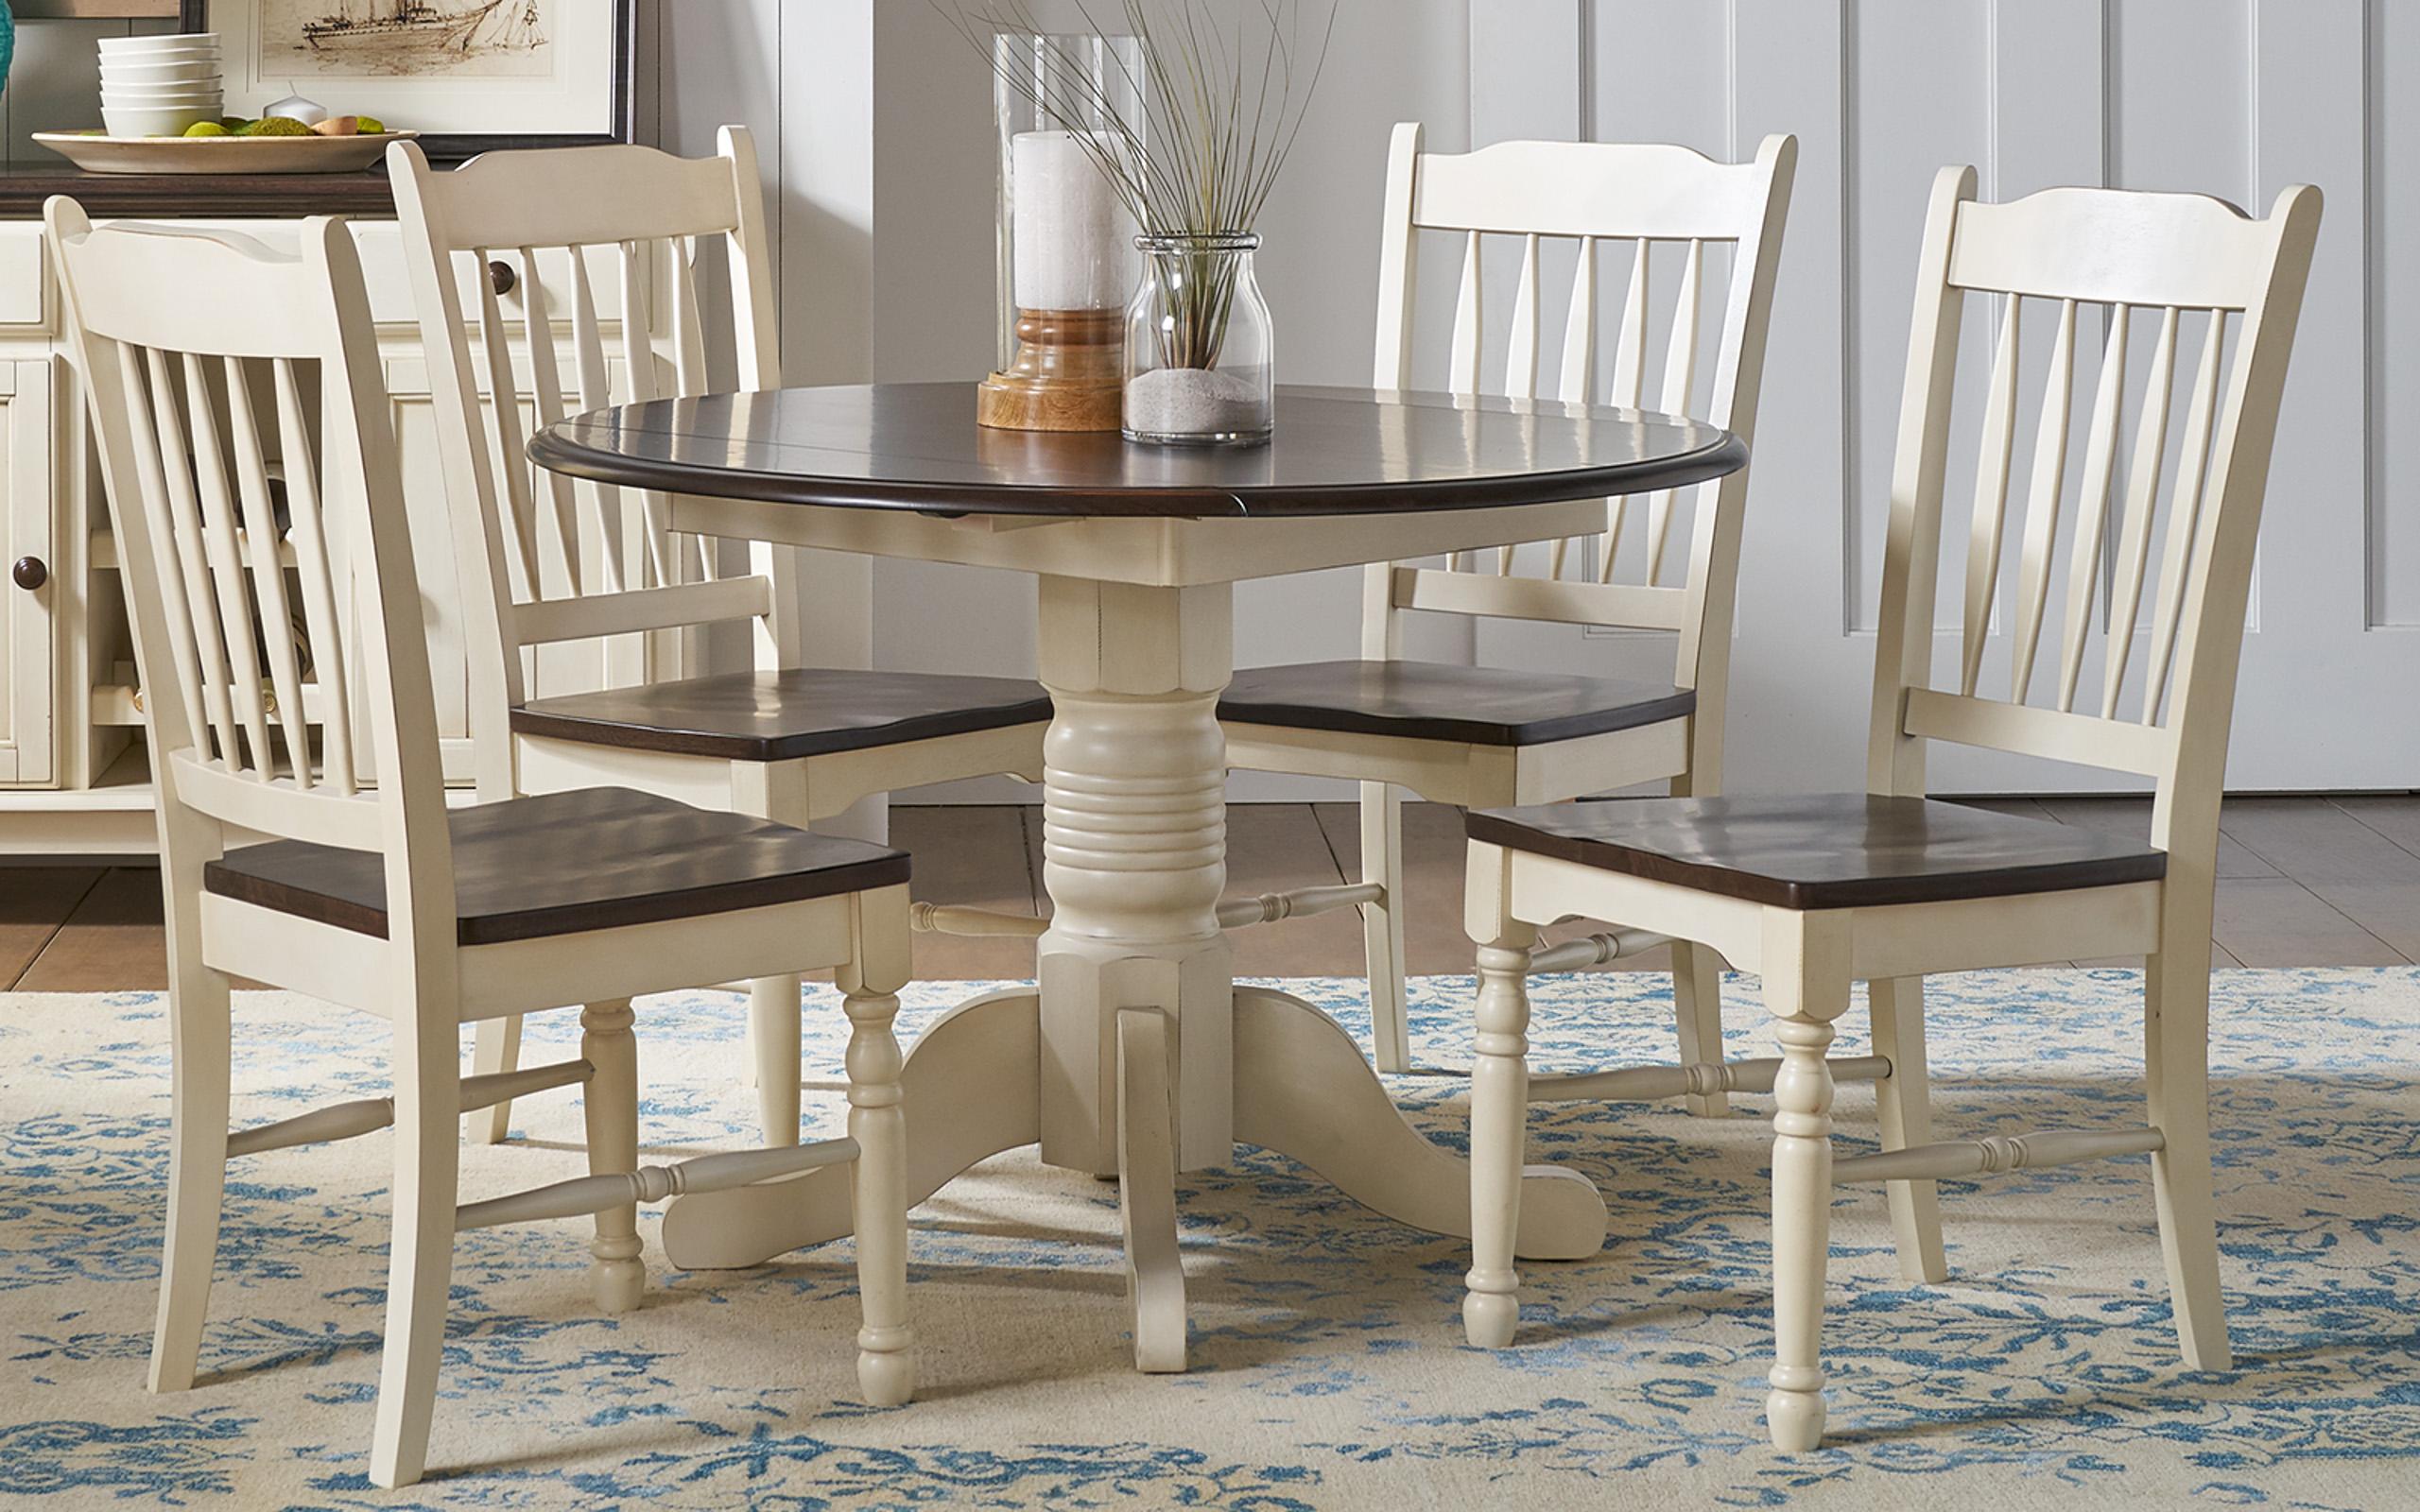 Rustic Dining Side Chair British Isles CO BRICO267K-Set-4 in Brown, White 